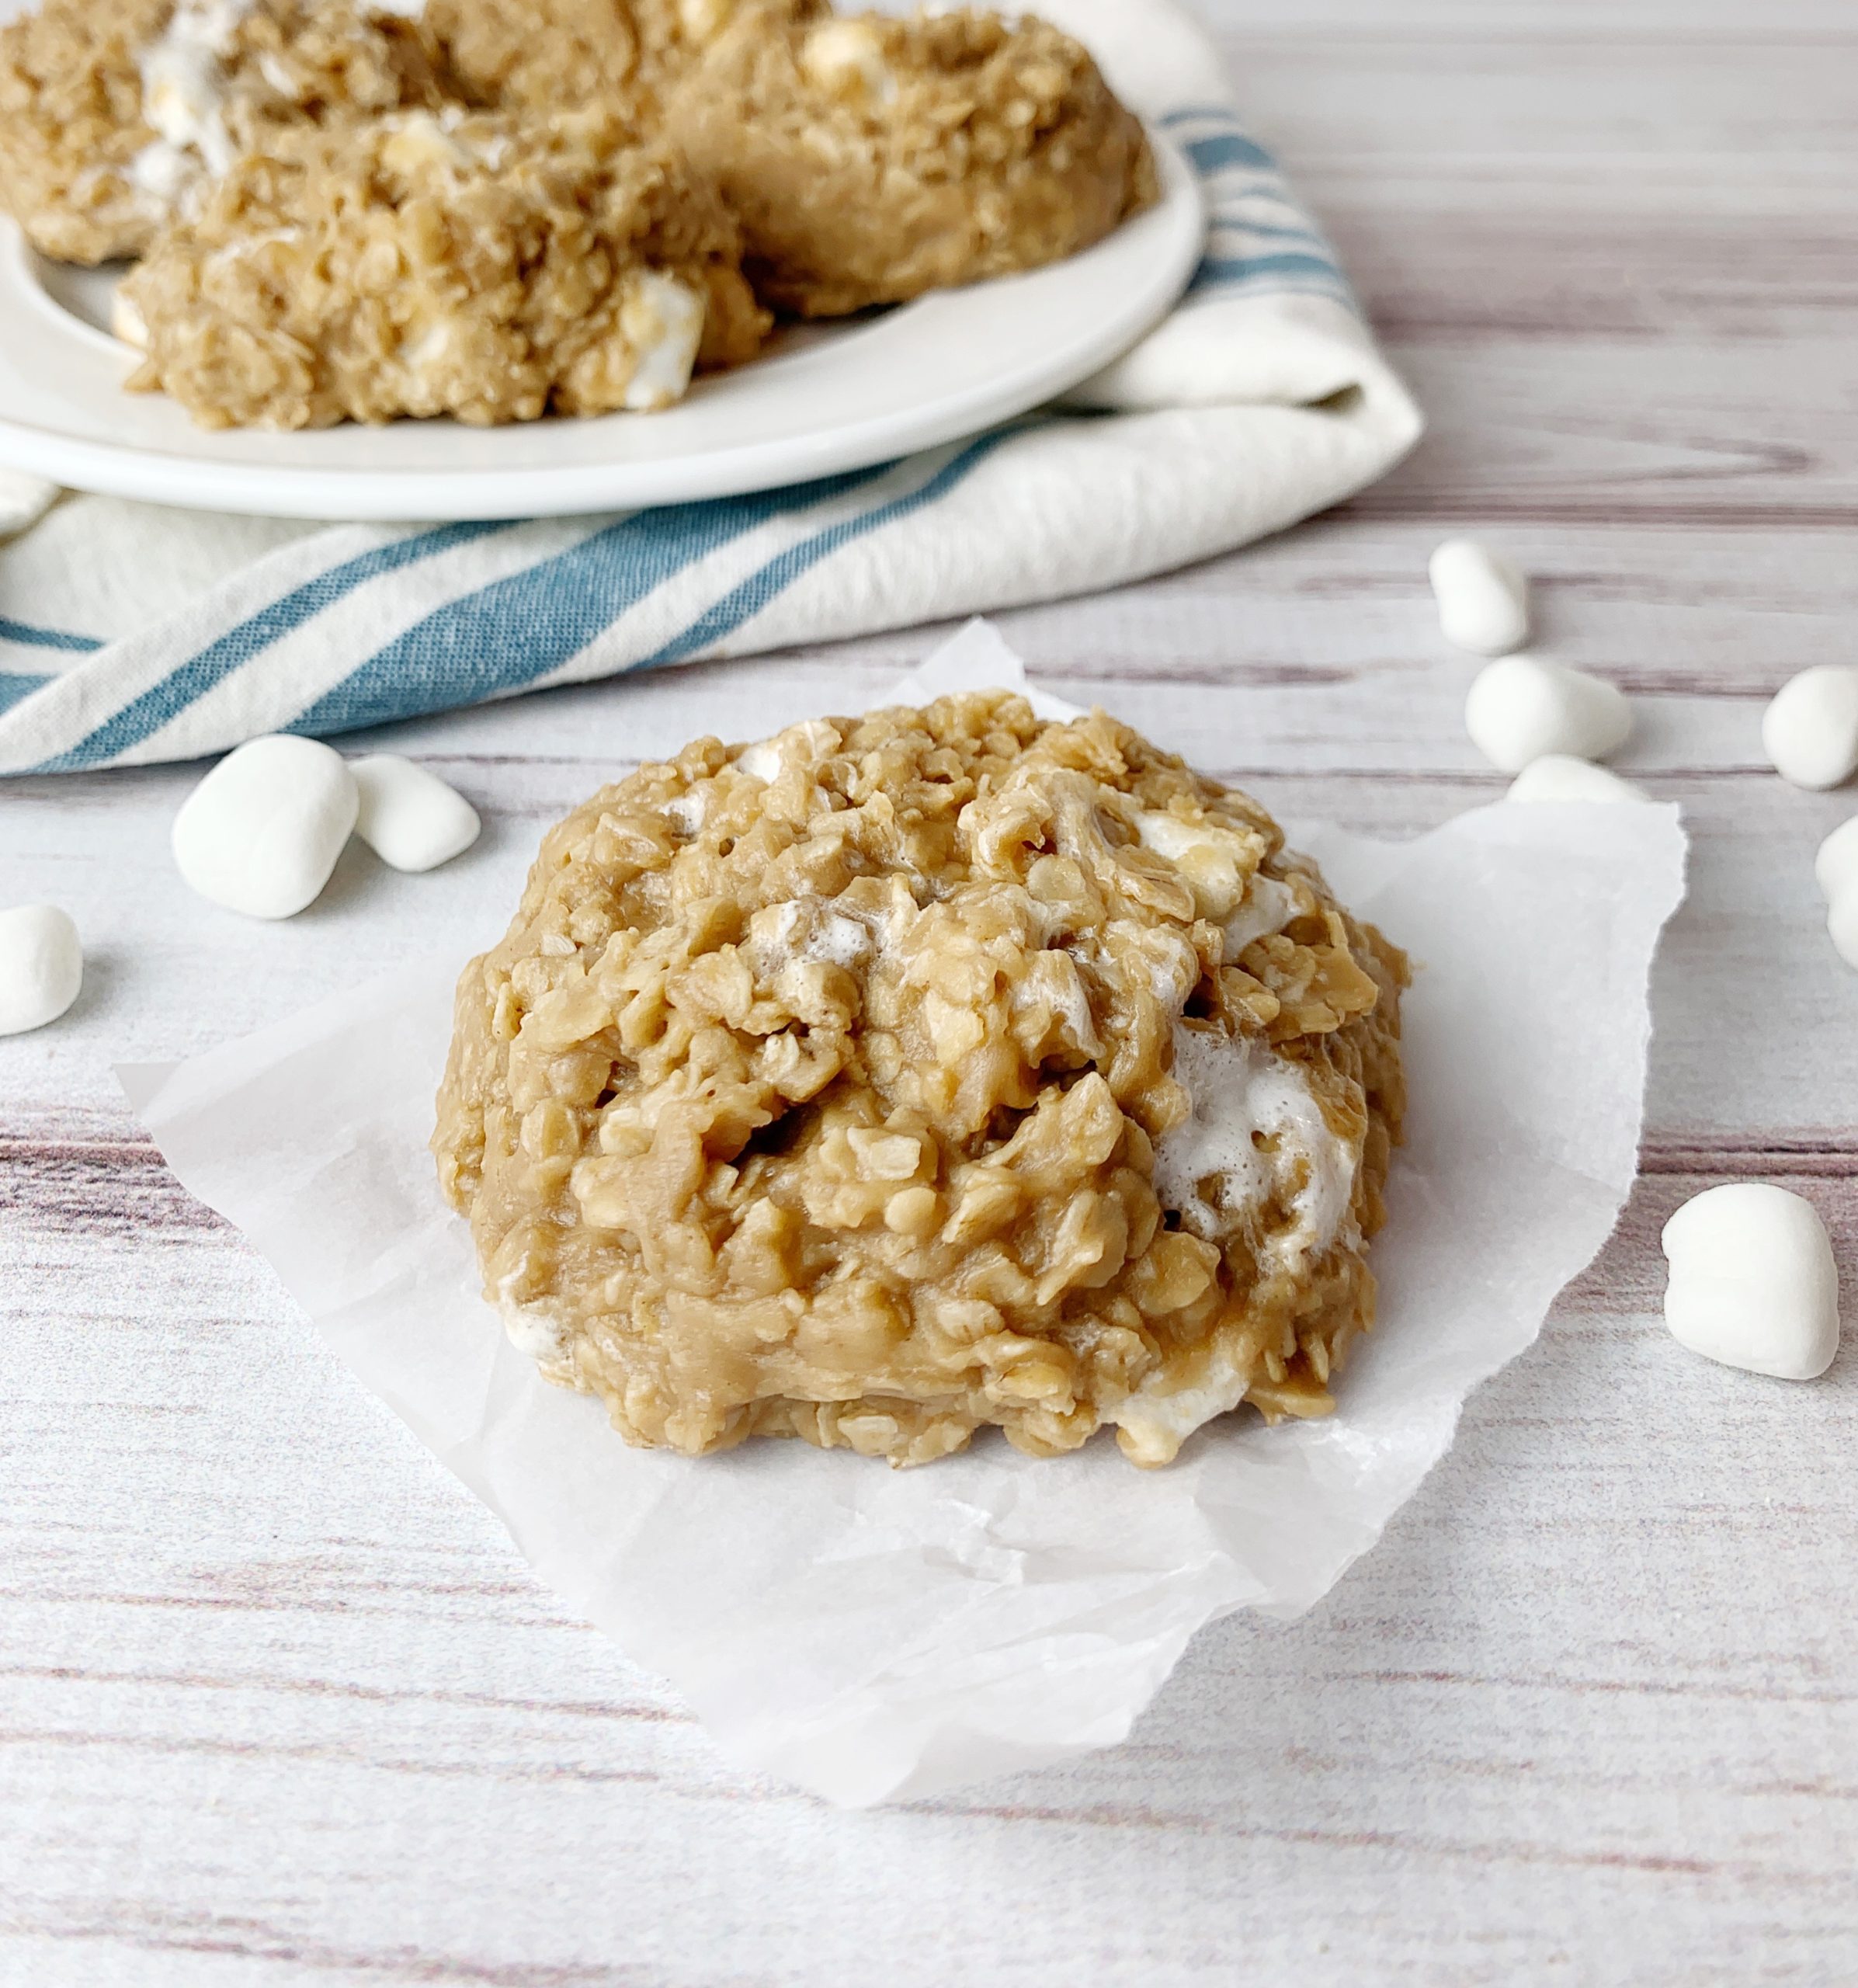 Peanut butter and fluff cookies